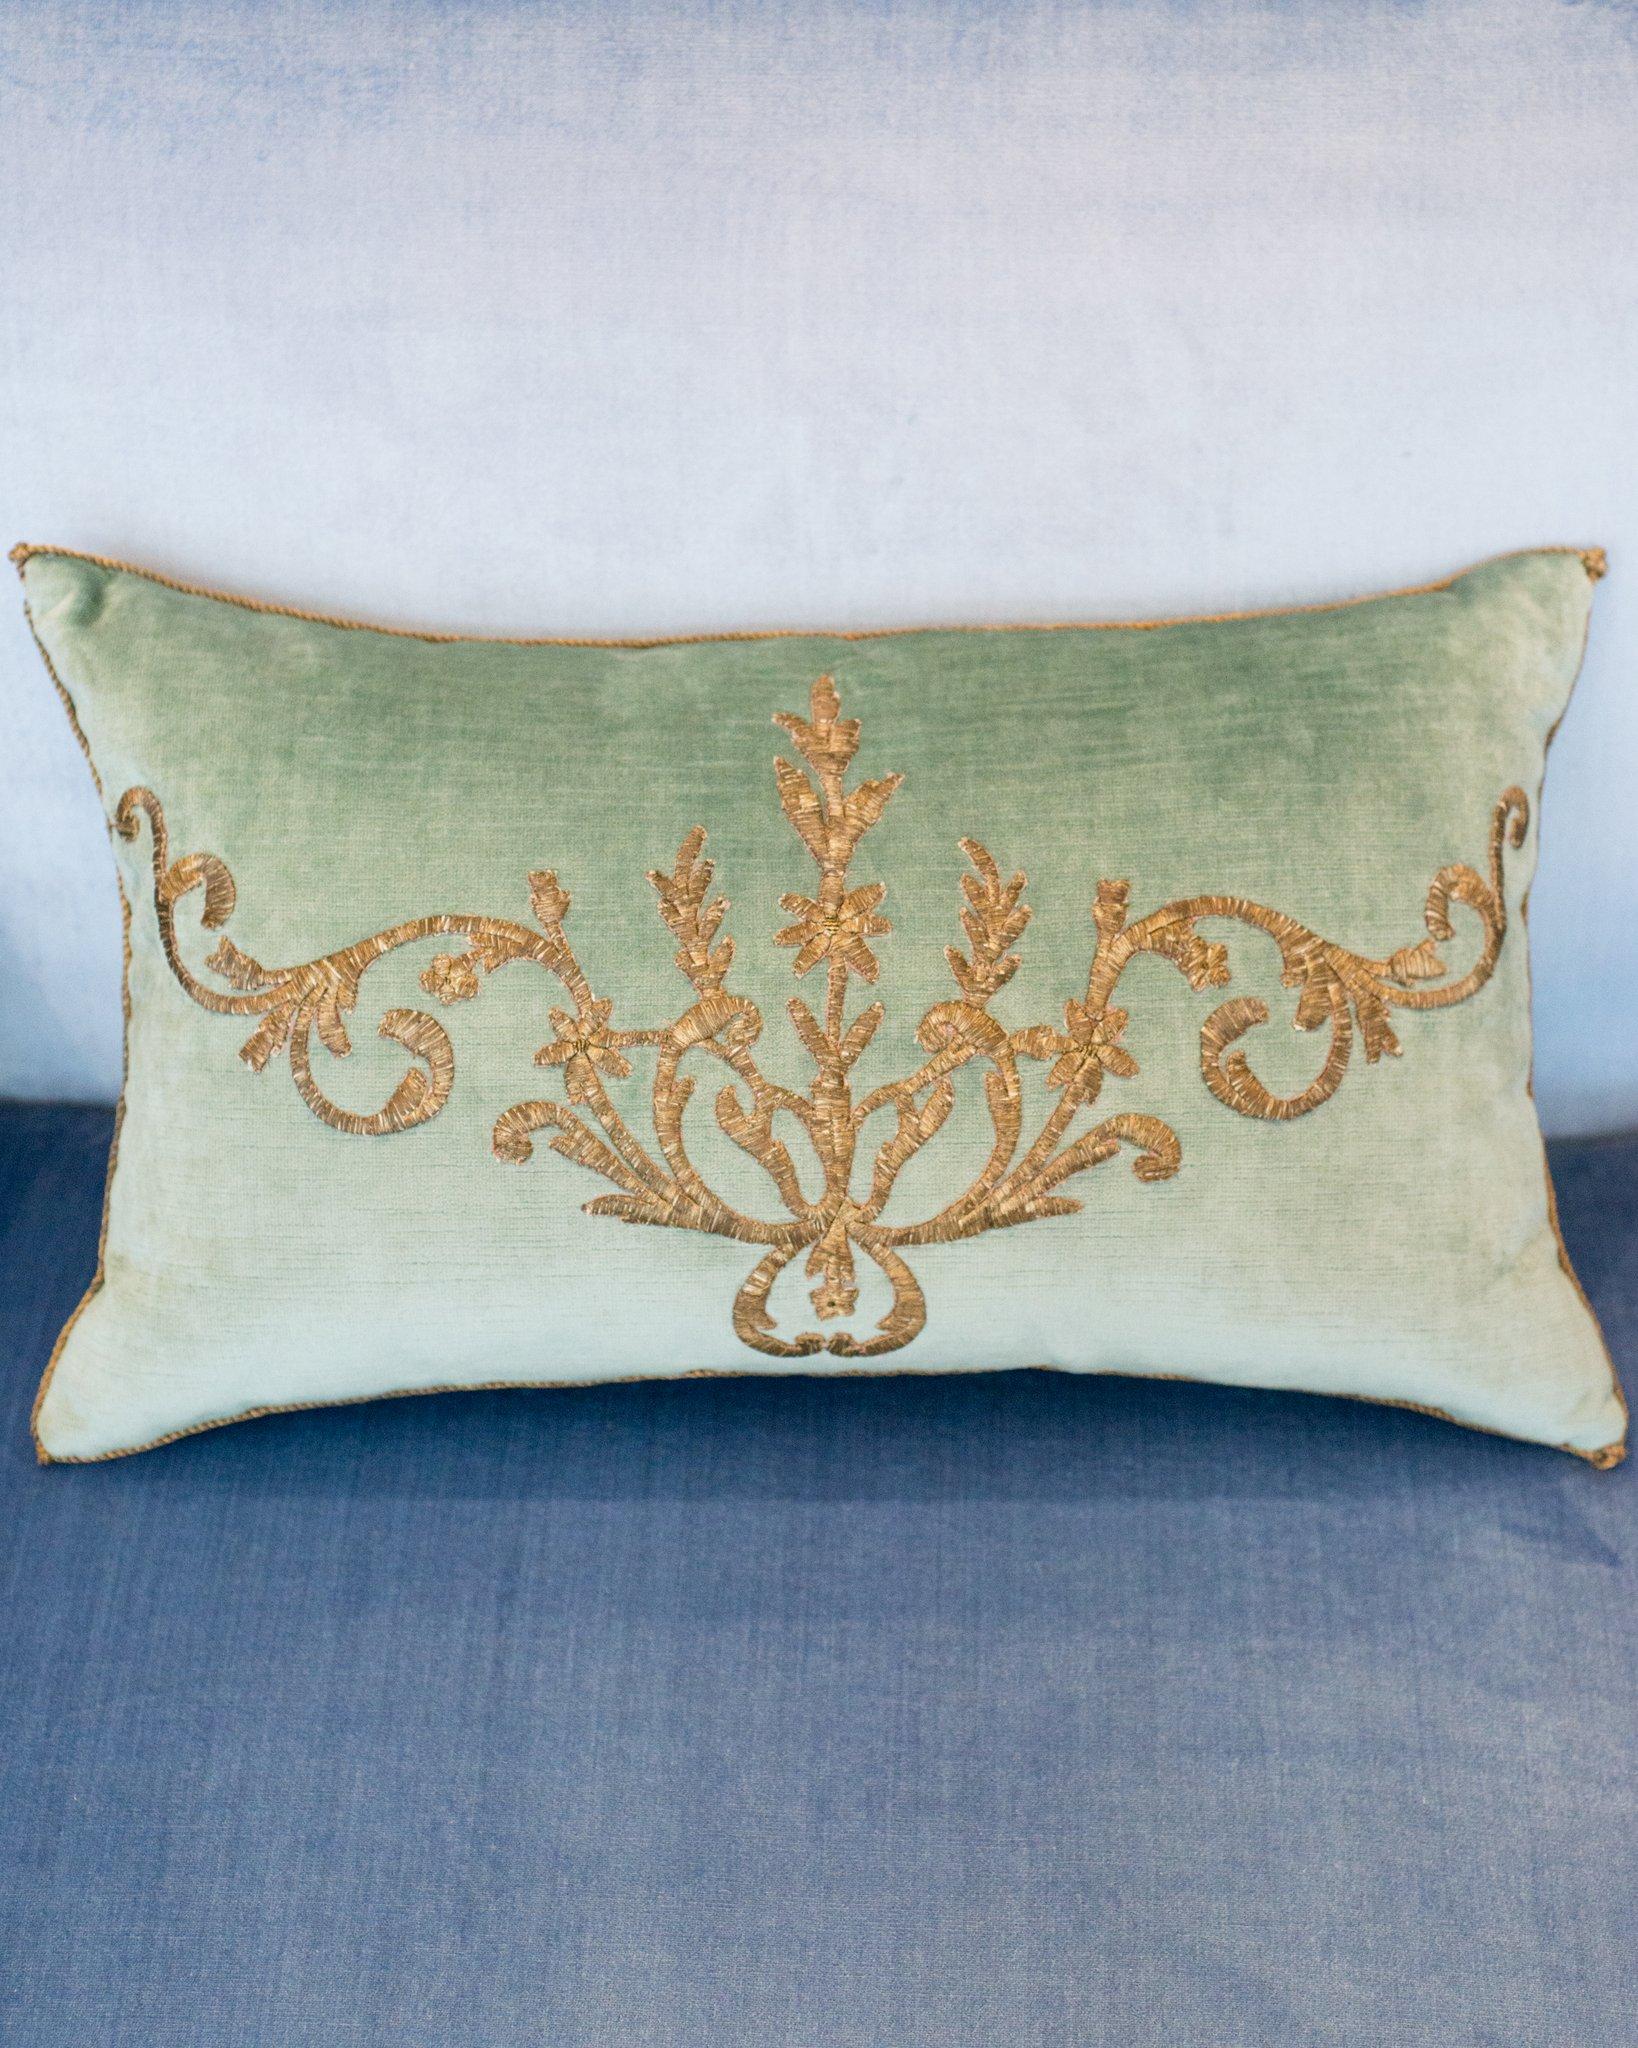 A stunning pair of Rebecca Vizard pillows with Antique Ottoman Empire raised metallic embroidery, hand stitched on aqua velvet.